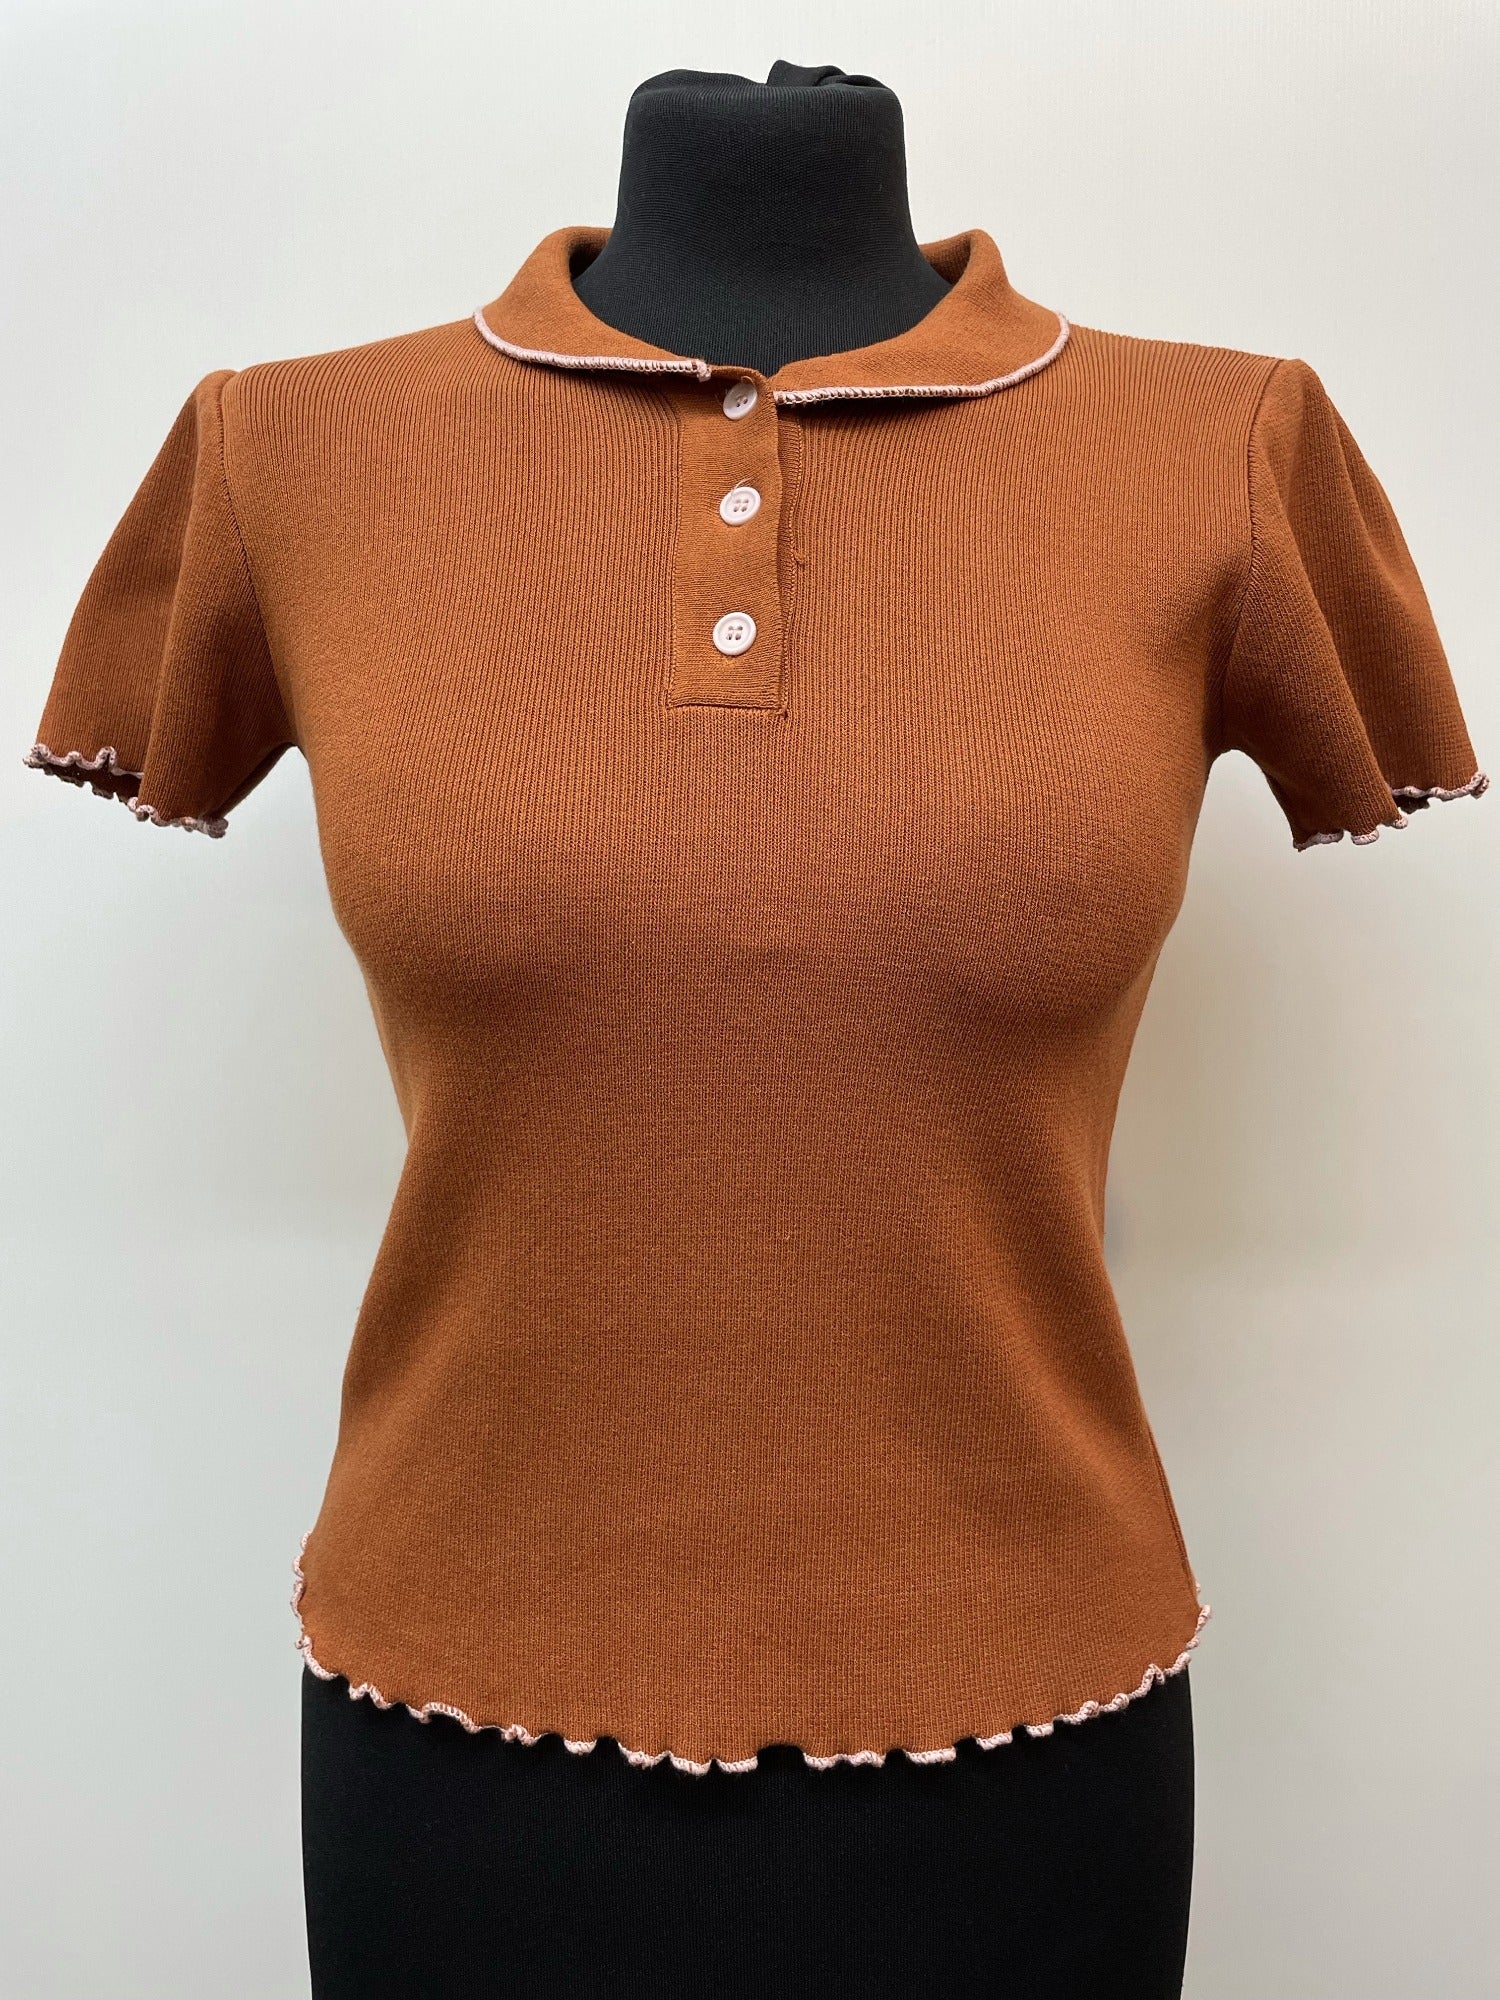 womens top  womens  vintage  Urban Village Vintage  urban village  Three Button  polo top  polo shirt  MOD  light knitwear  light knit  knitwear  knitted  knit  fine knit  collared  collar  button up  brown  blouse  4  3 button  1960s